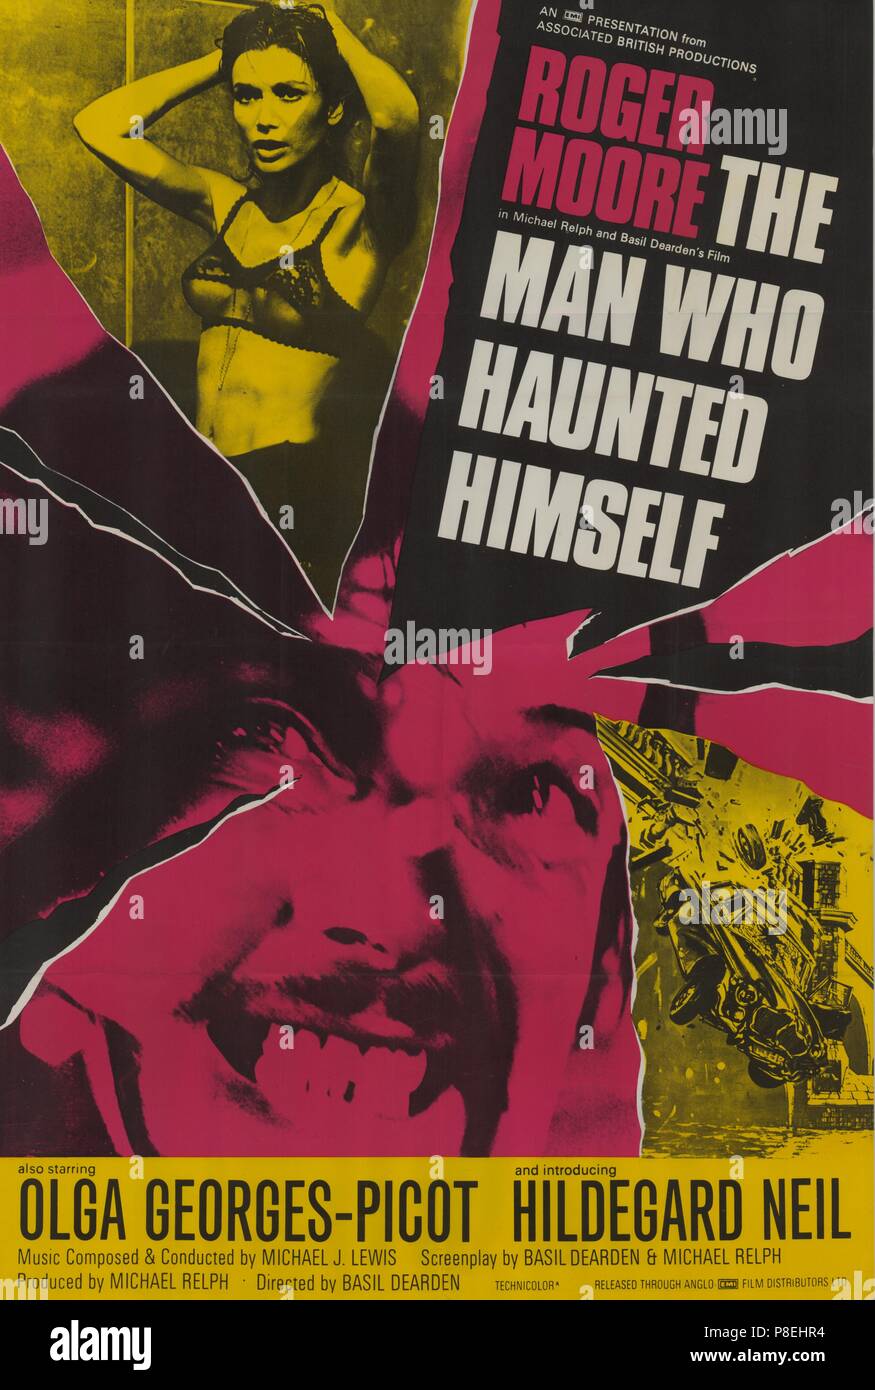 The Man who Haunted Himself (1970) Publicity information, Film Poster,     Date: 1970 Stock Photo